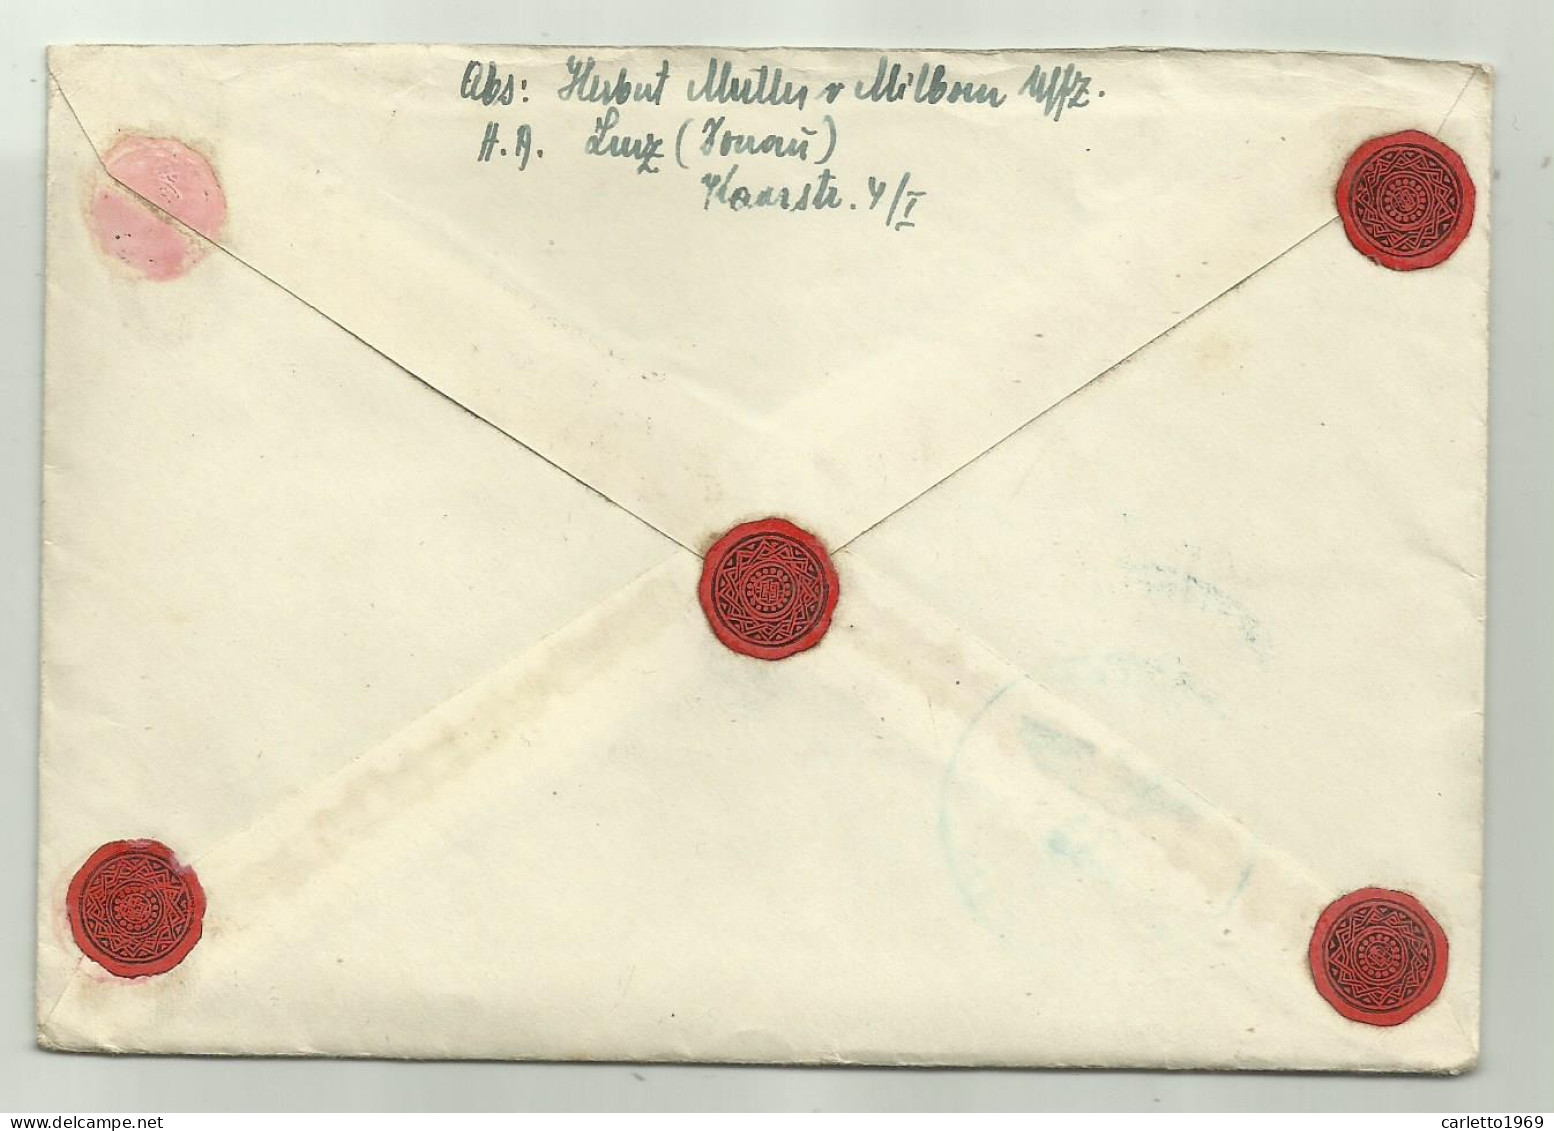 FELDPOST 1942   CON LETTERA  - Used Stamps